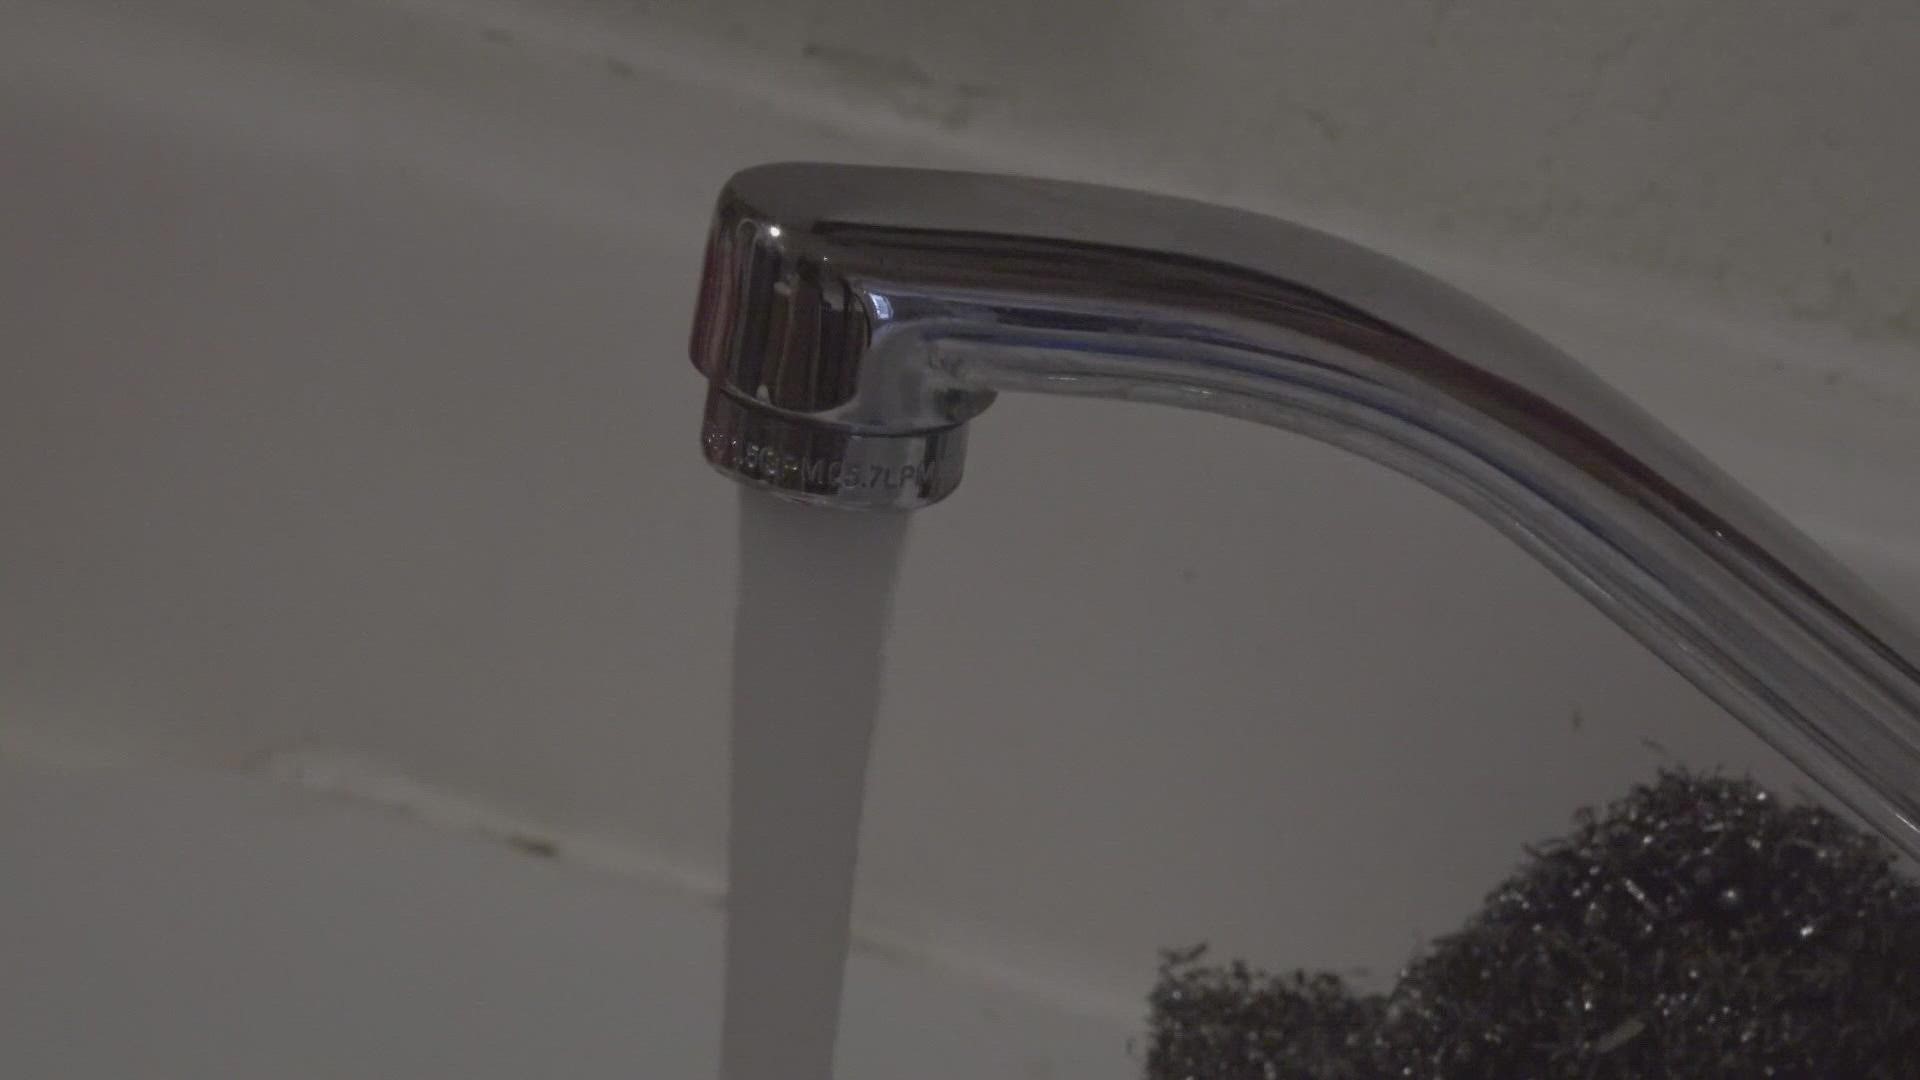 The Ector County Utility District's recent study found that lead exposure in the water is likely for any house built before 1986.